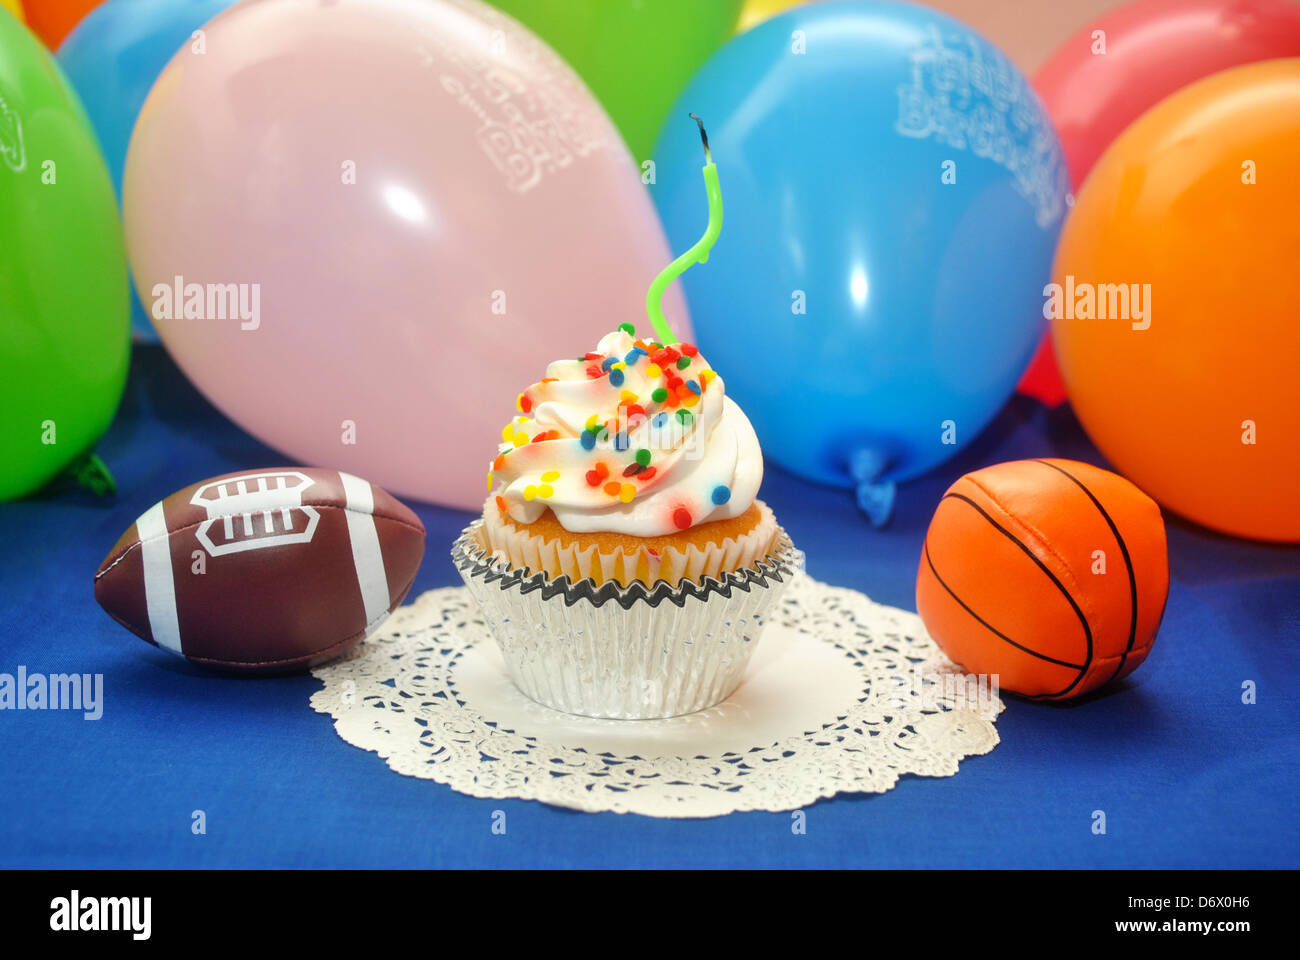 Bithday Cupcake with 1 Candle and a Toy Football and Basketball Stock Photo